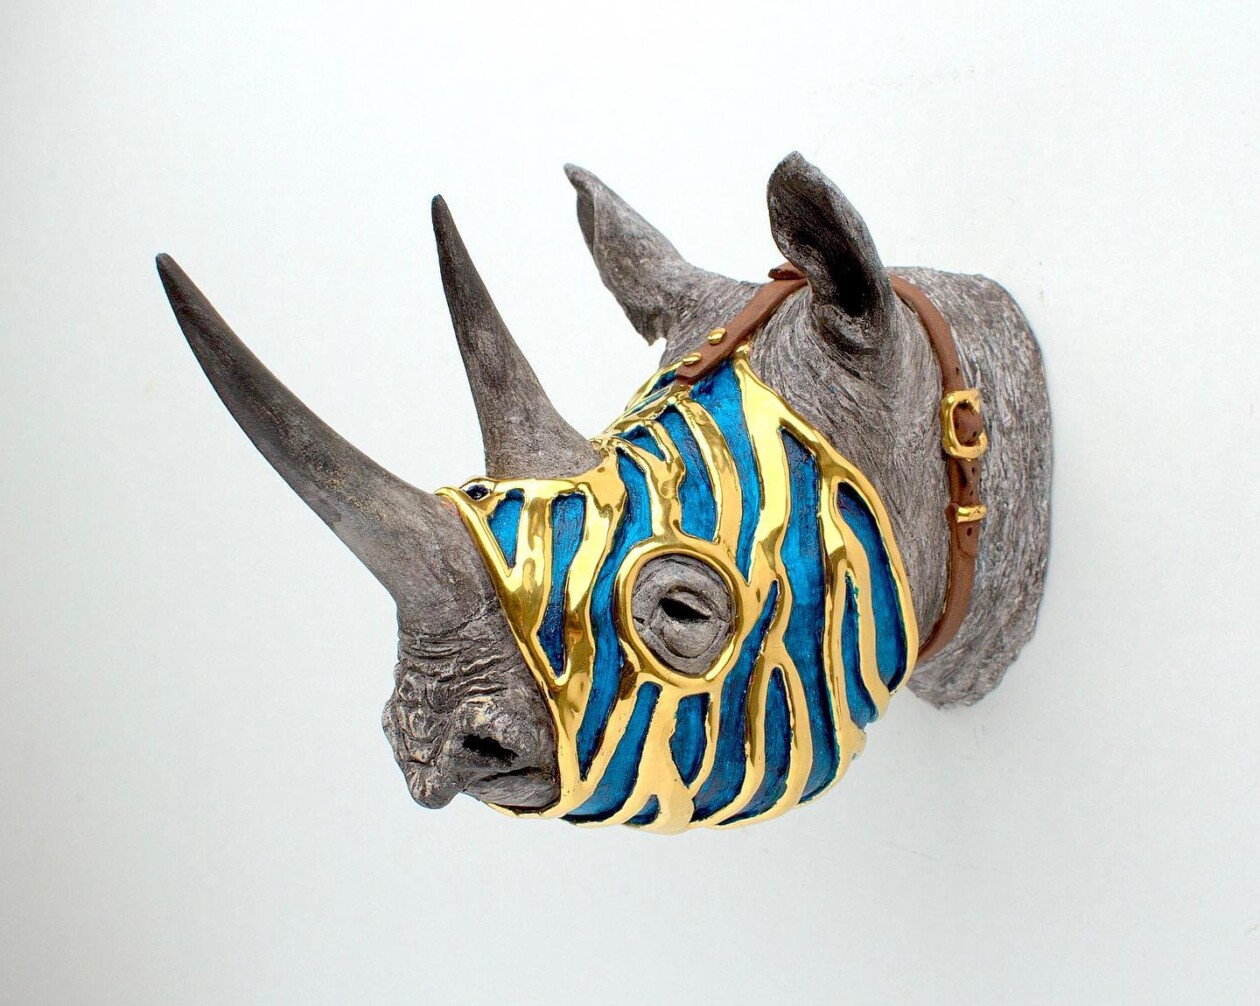 When Animals Dream, The Whimsical Sculptures Of Alan Waring (4)